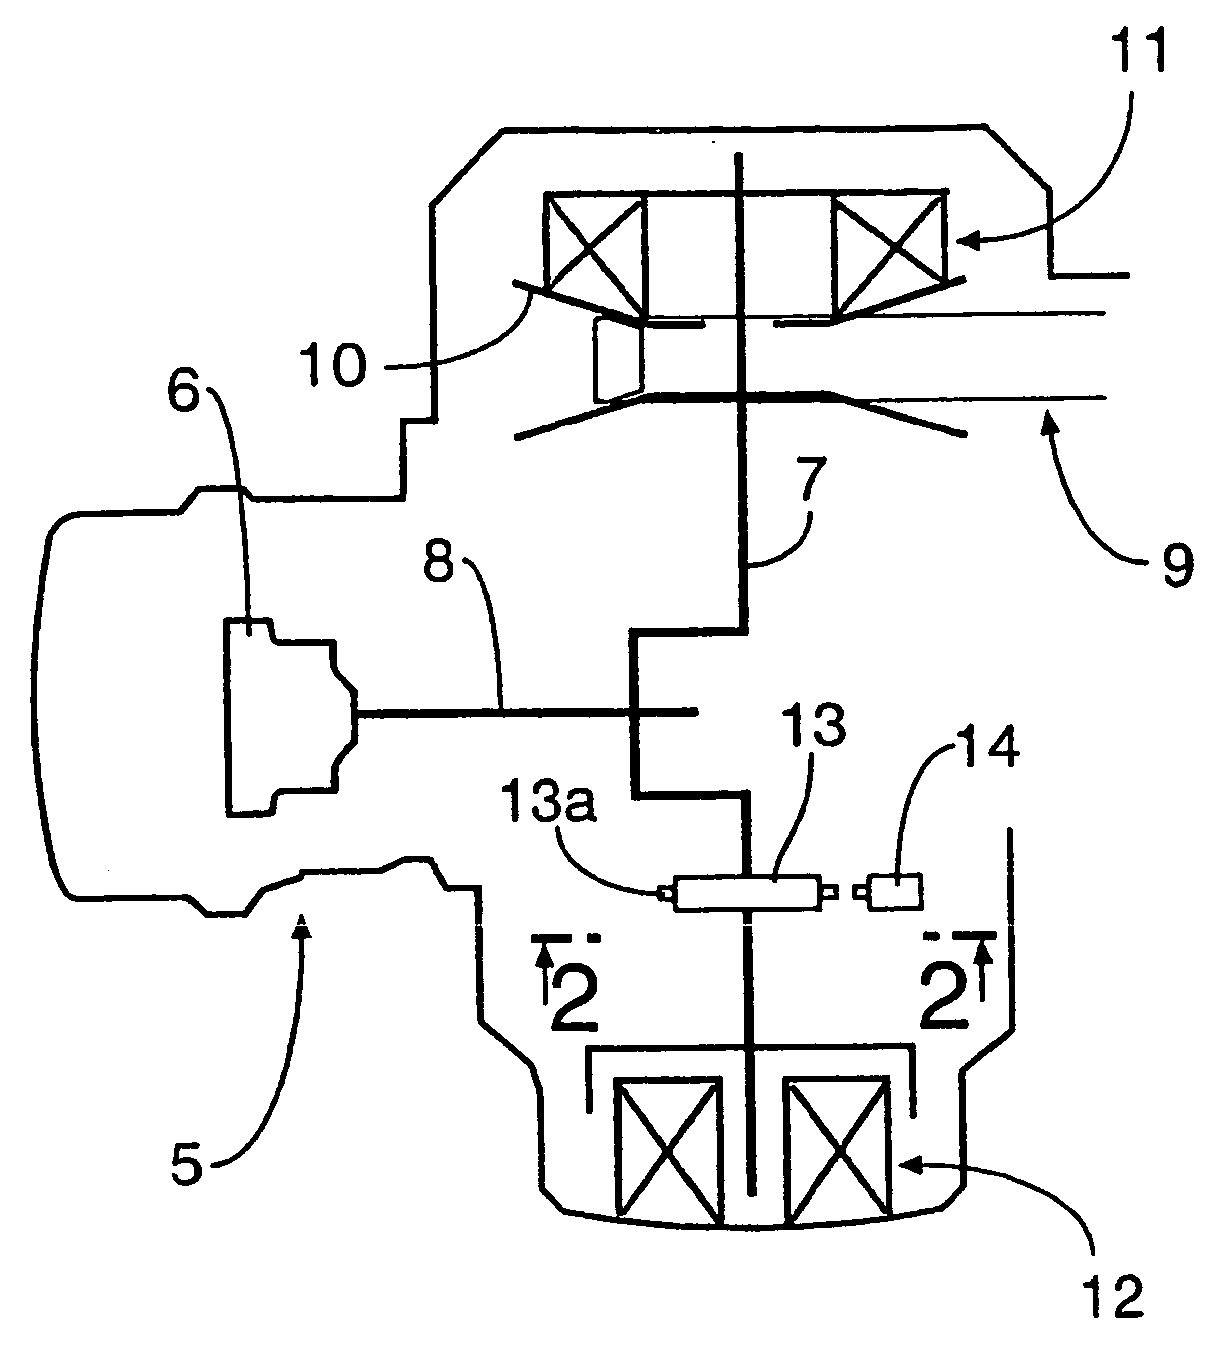 Clutch connection/disconnection detection system for single-cylinder engine